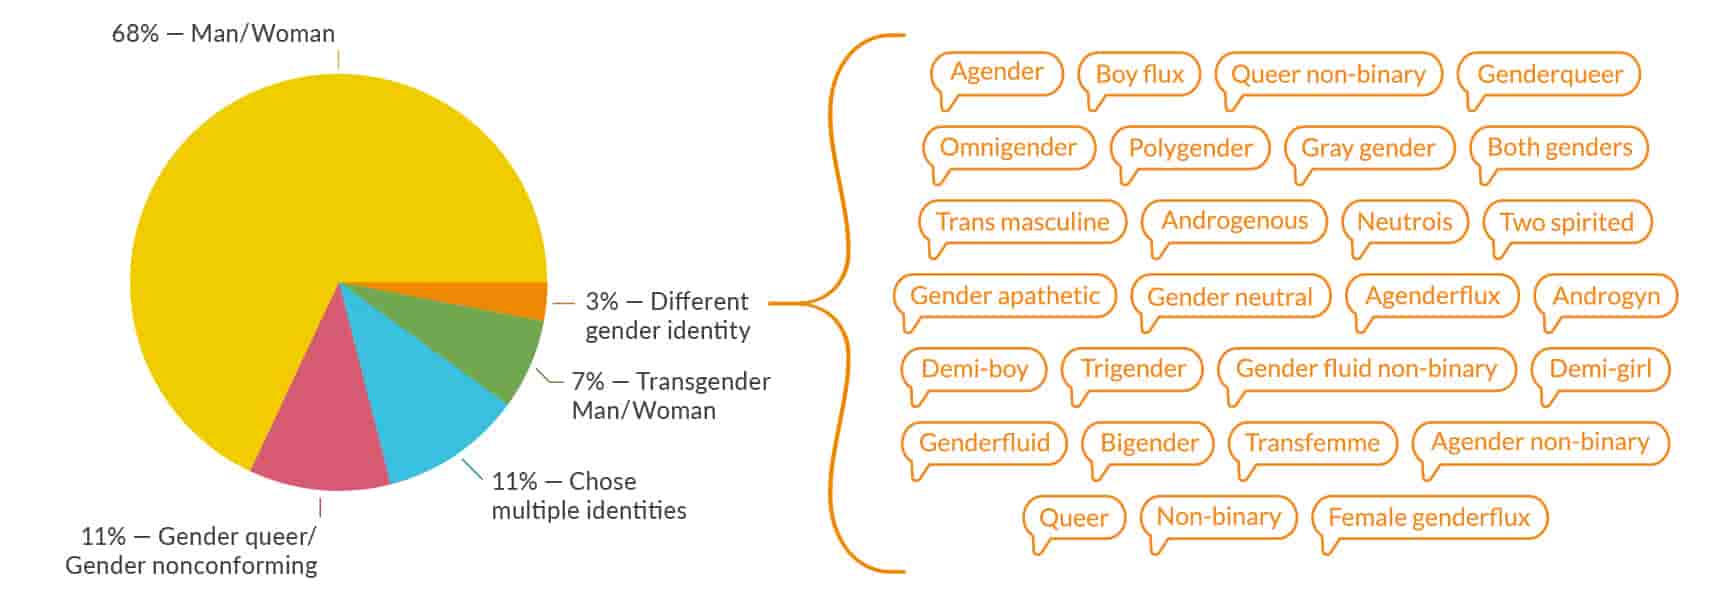 List of Male gender nonconformity